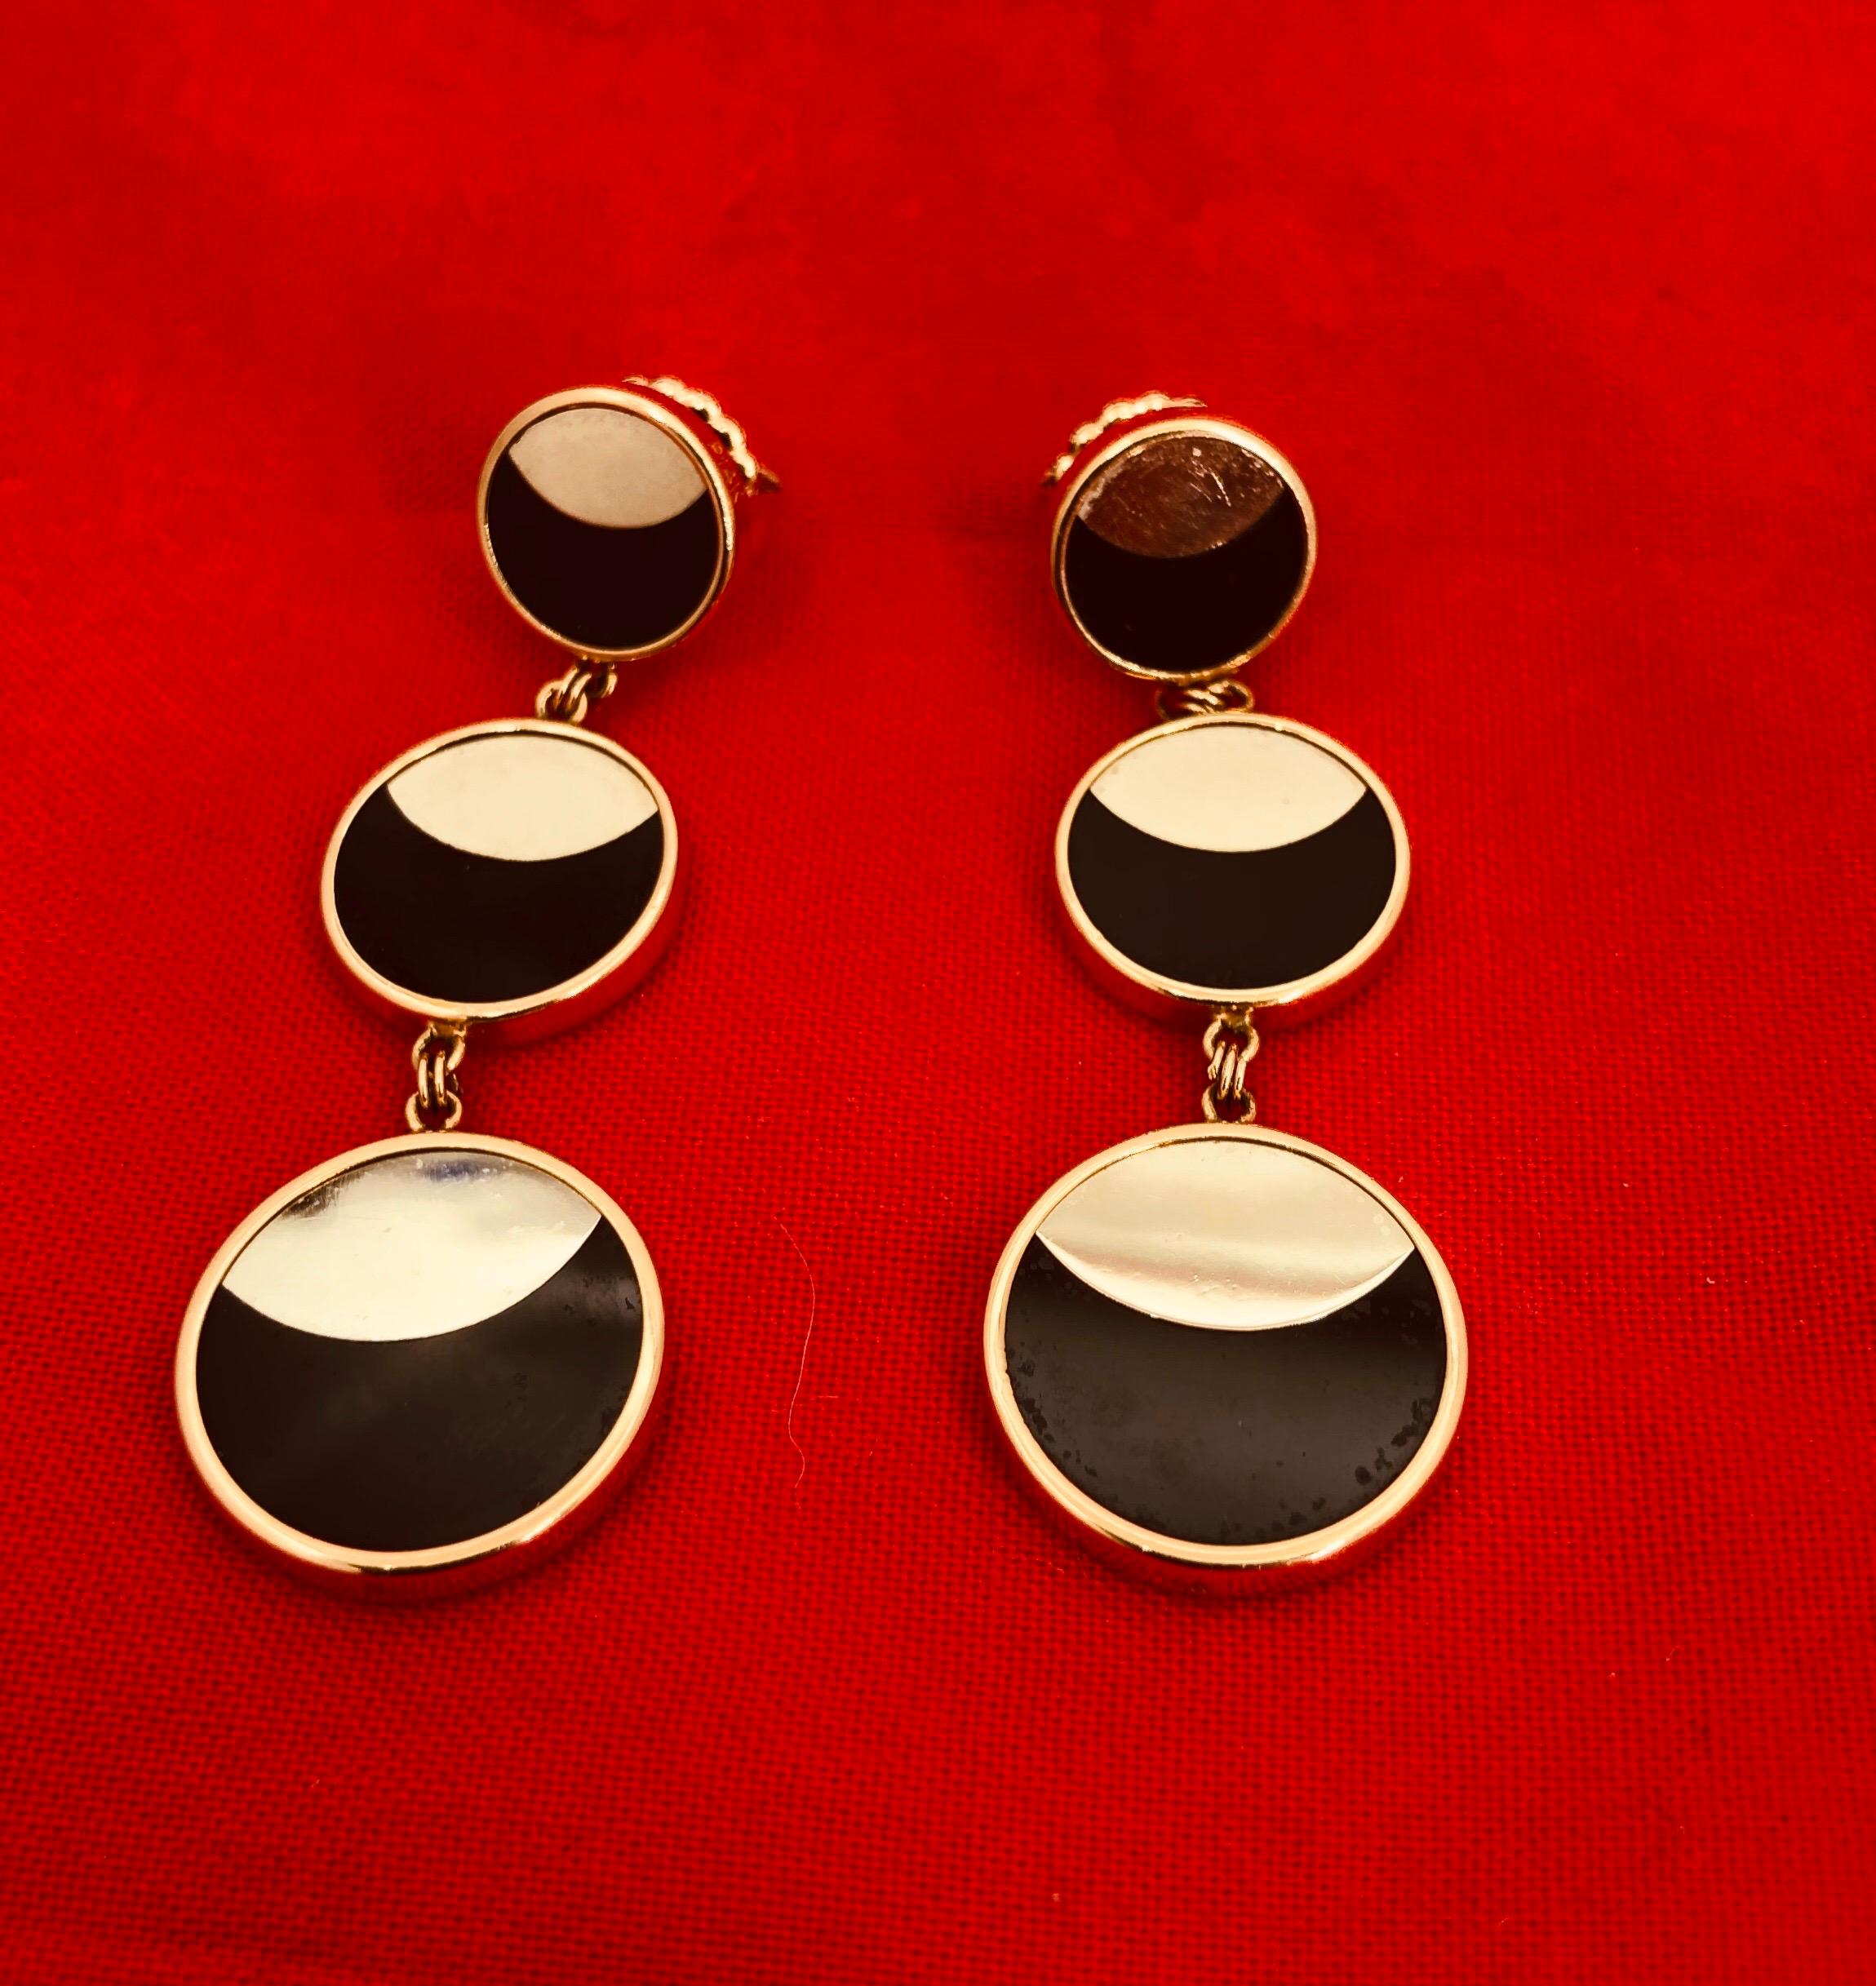 Half Moon Cut Yellow Gold Hanging Earrings with Onyx and Modern Design